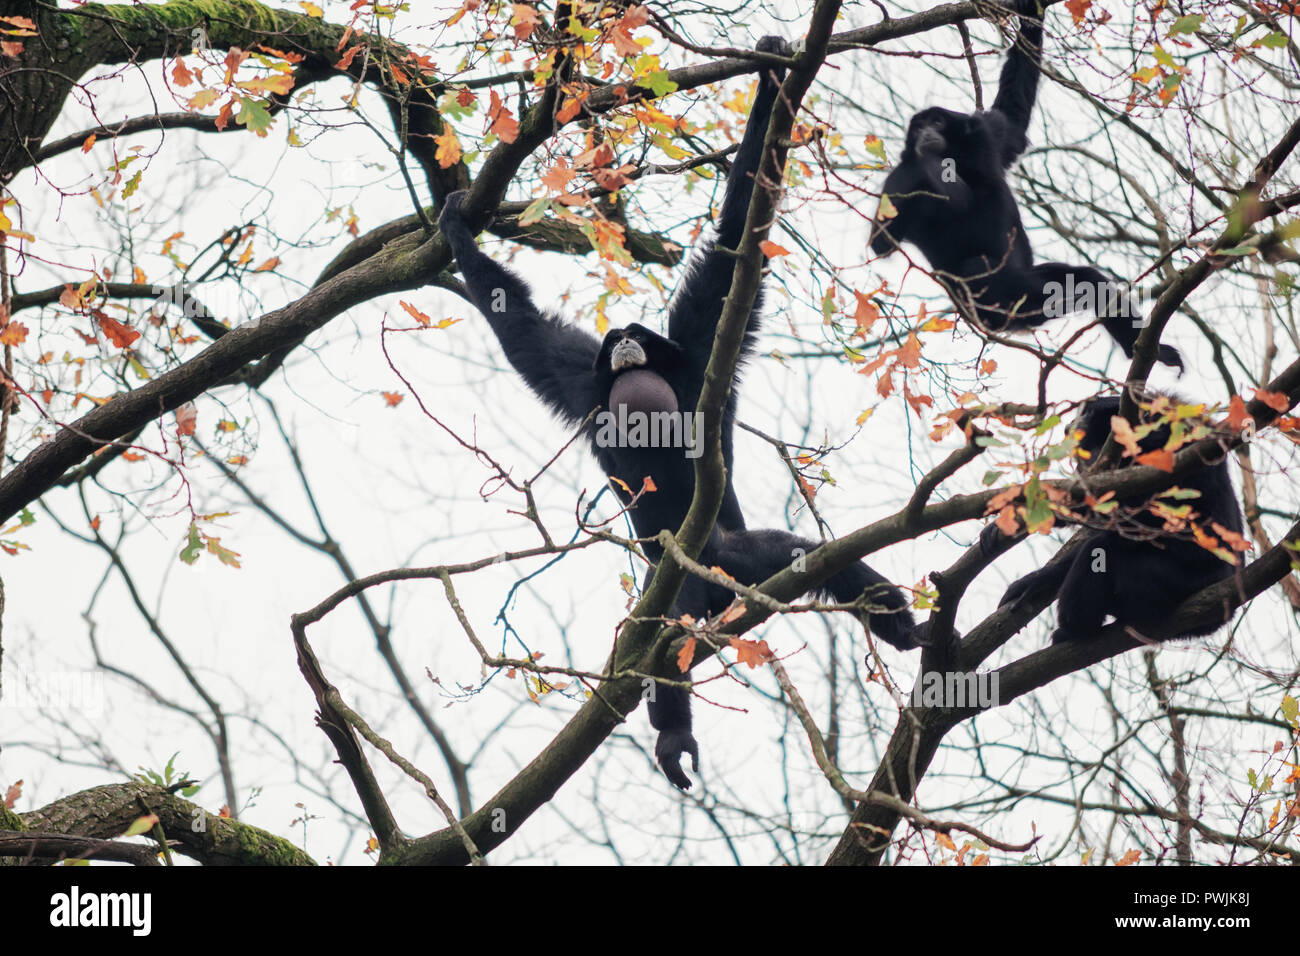 Siamangs playing high in the trees in Burgers' Zoo in The Netherlands Stock Photo